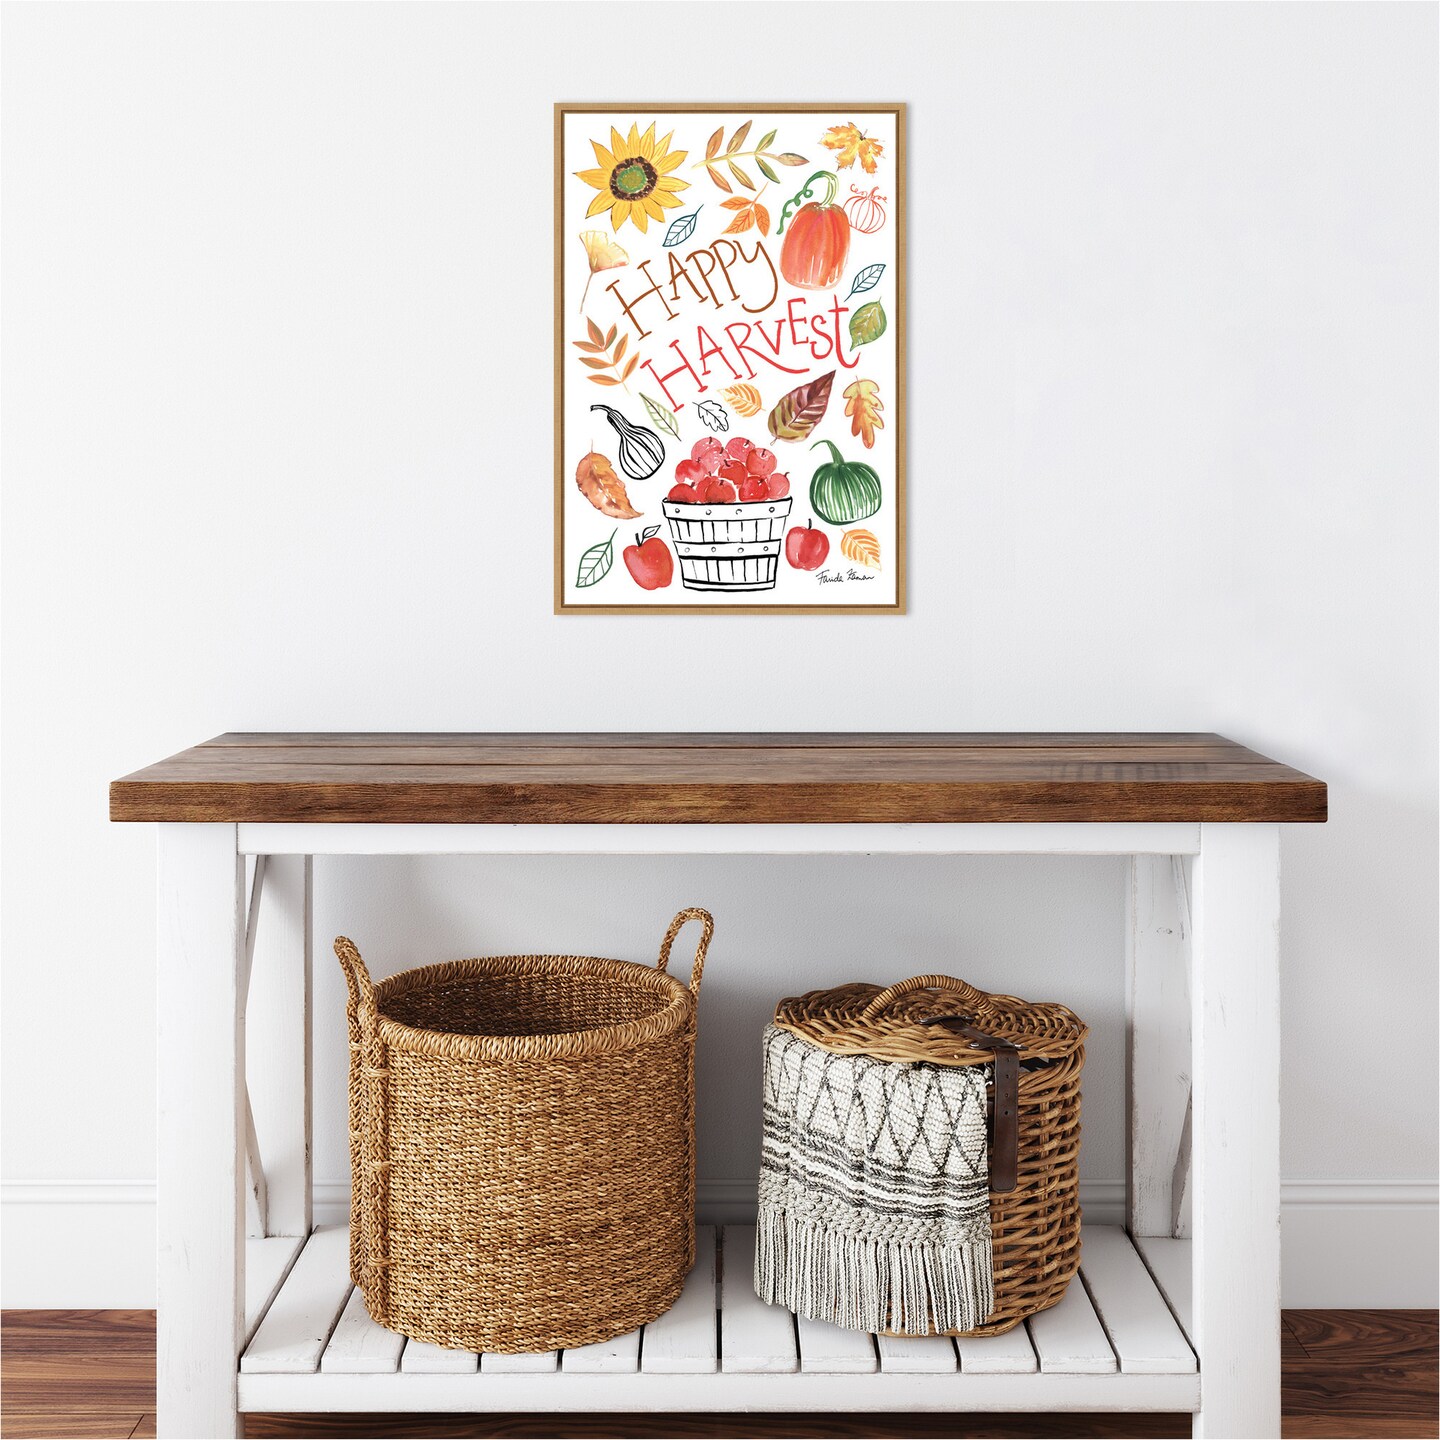 Hello Fall III by Farida Zaman 16-in. W x 23-in. H. Canvas Wall Art Print Framed in Natural